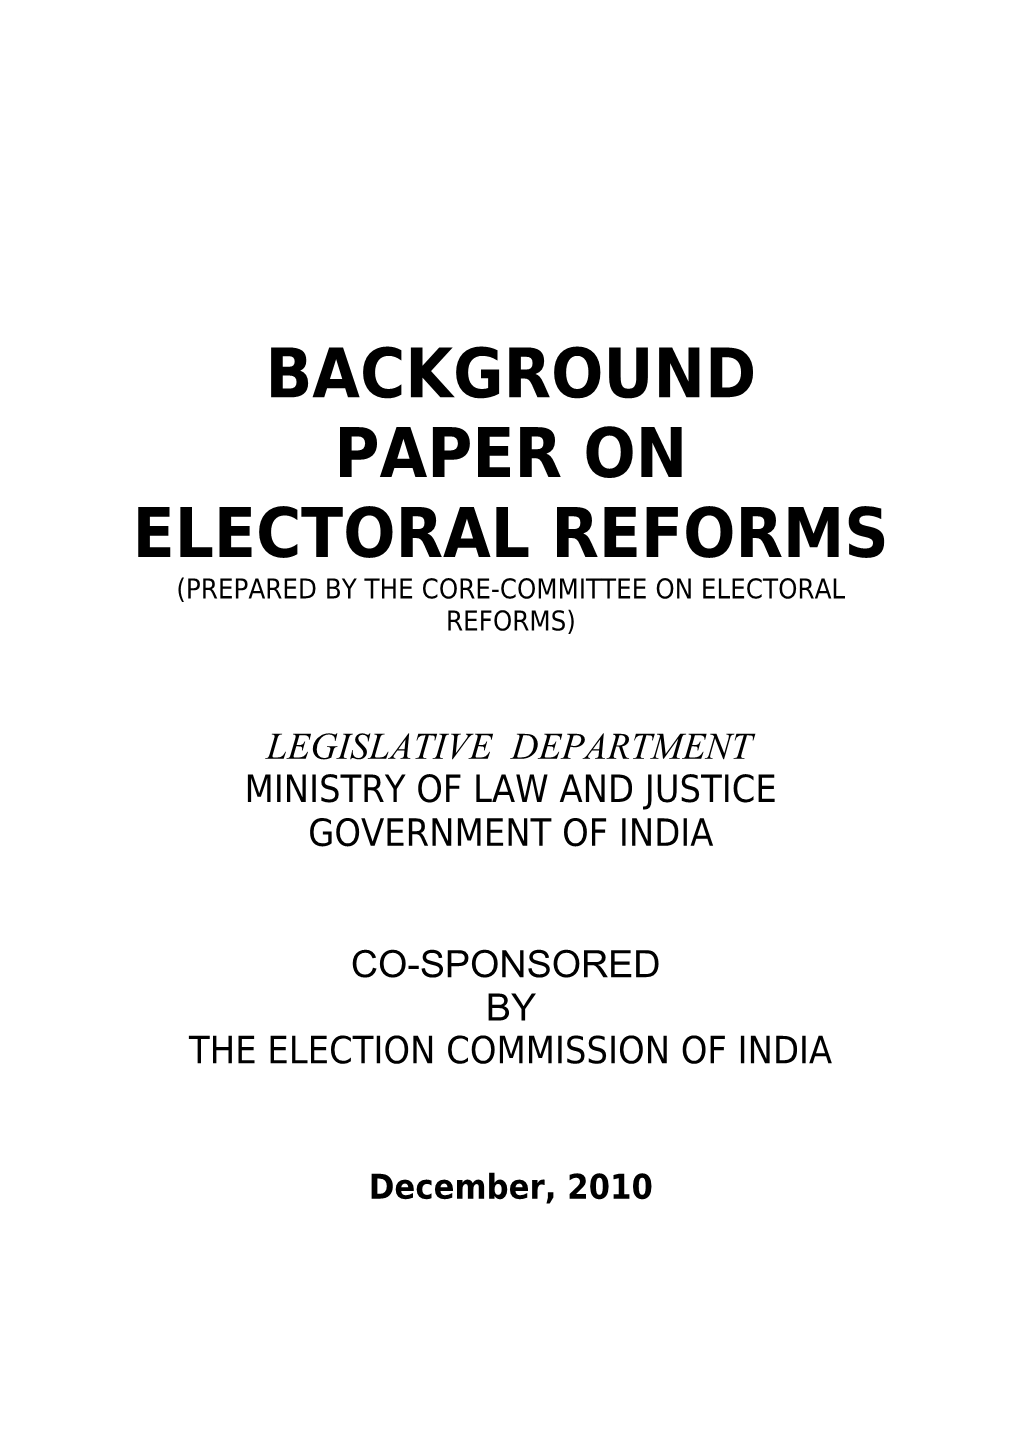 Committee on Electoral Reforms